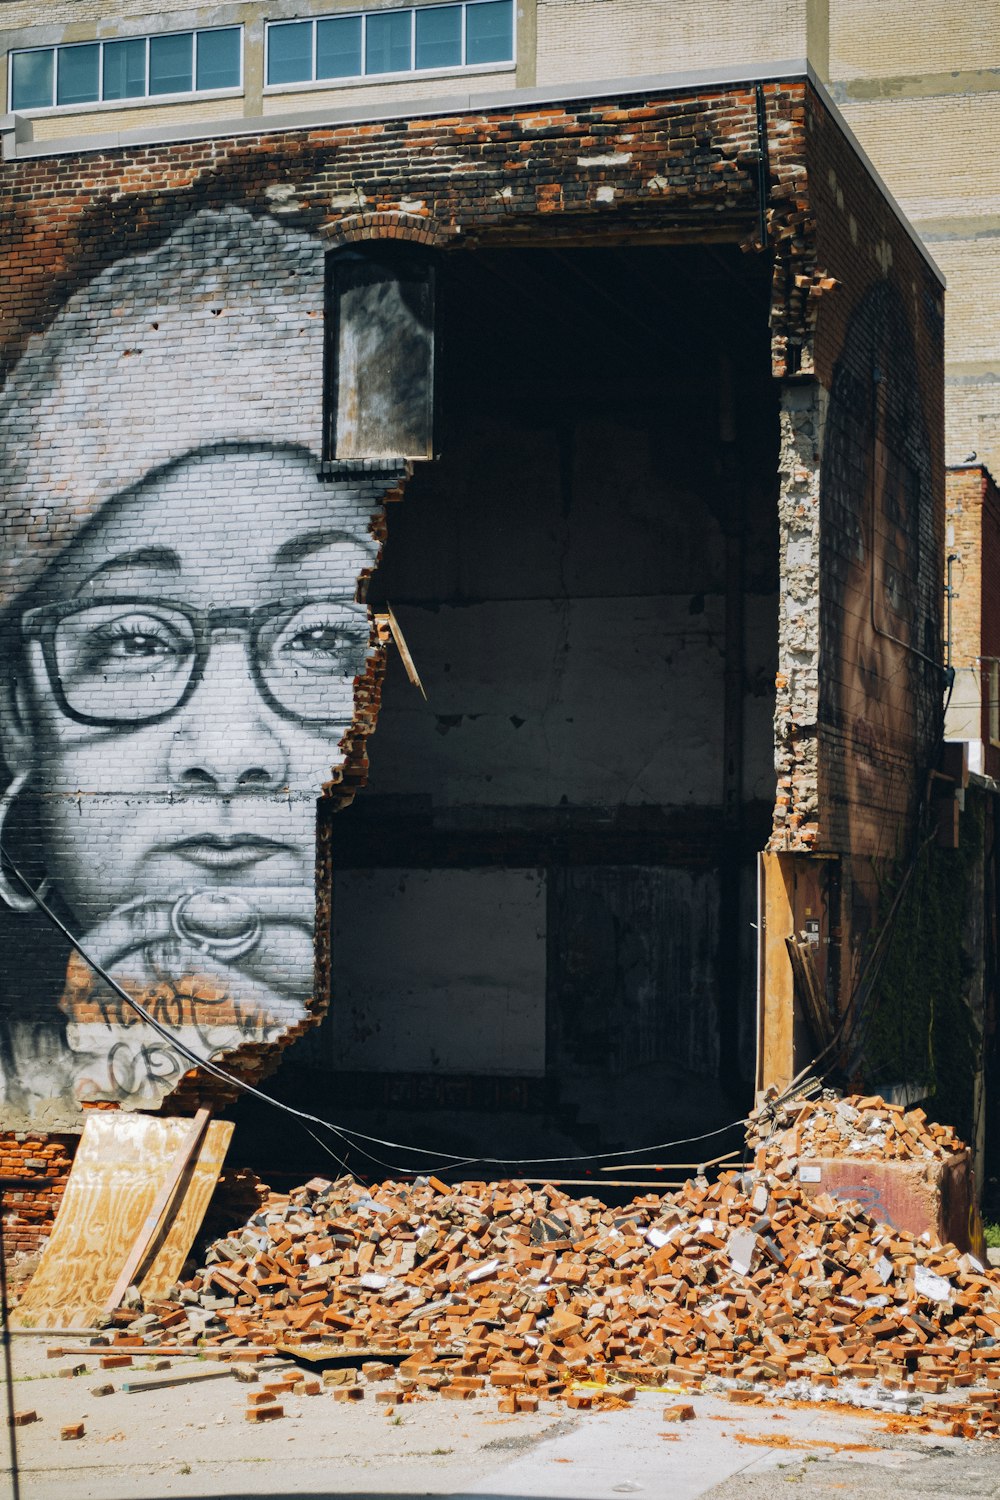 a mural of a man with glasses on a building